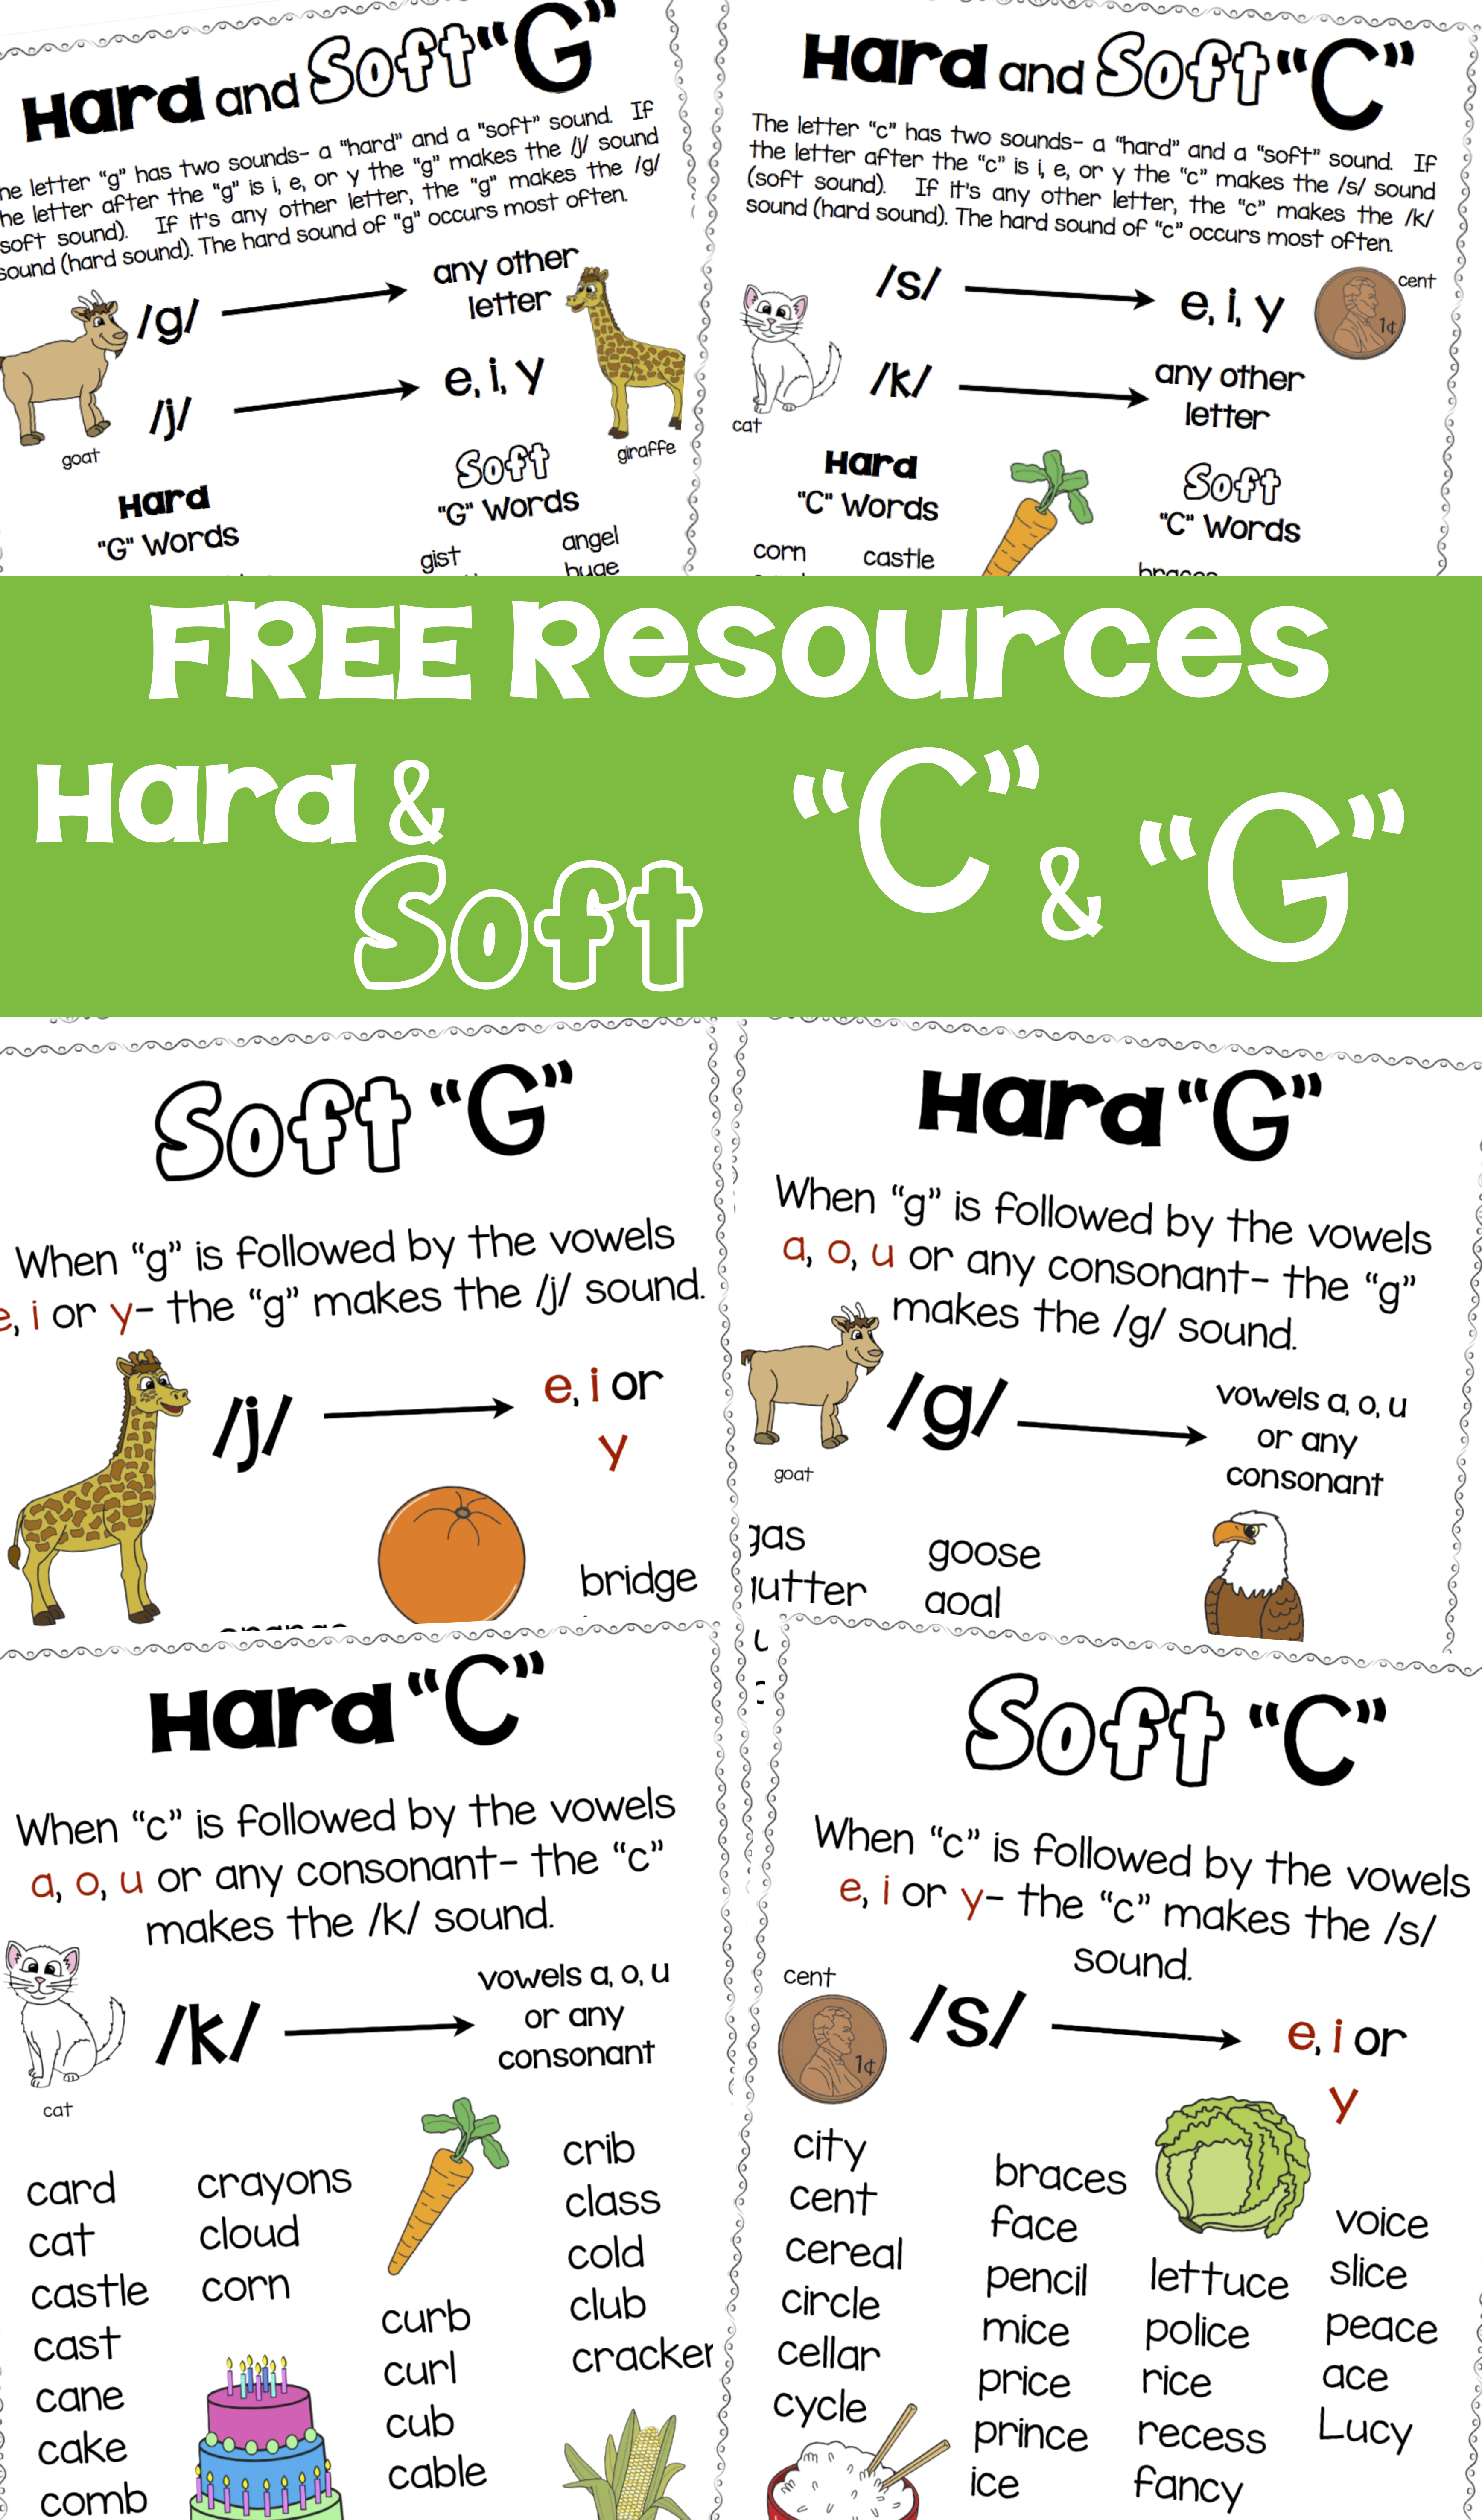 Hard and Soft c and g free resource